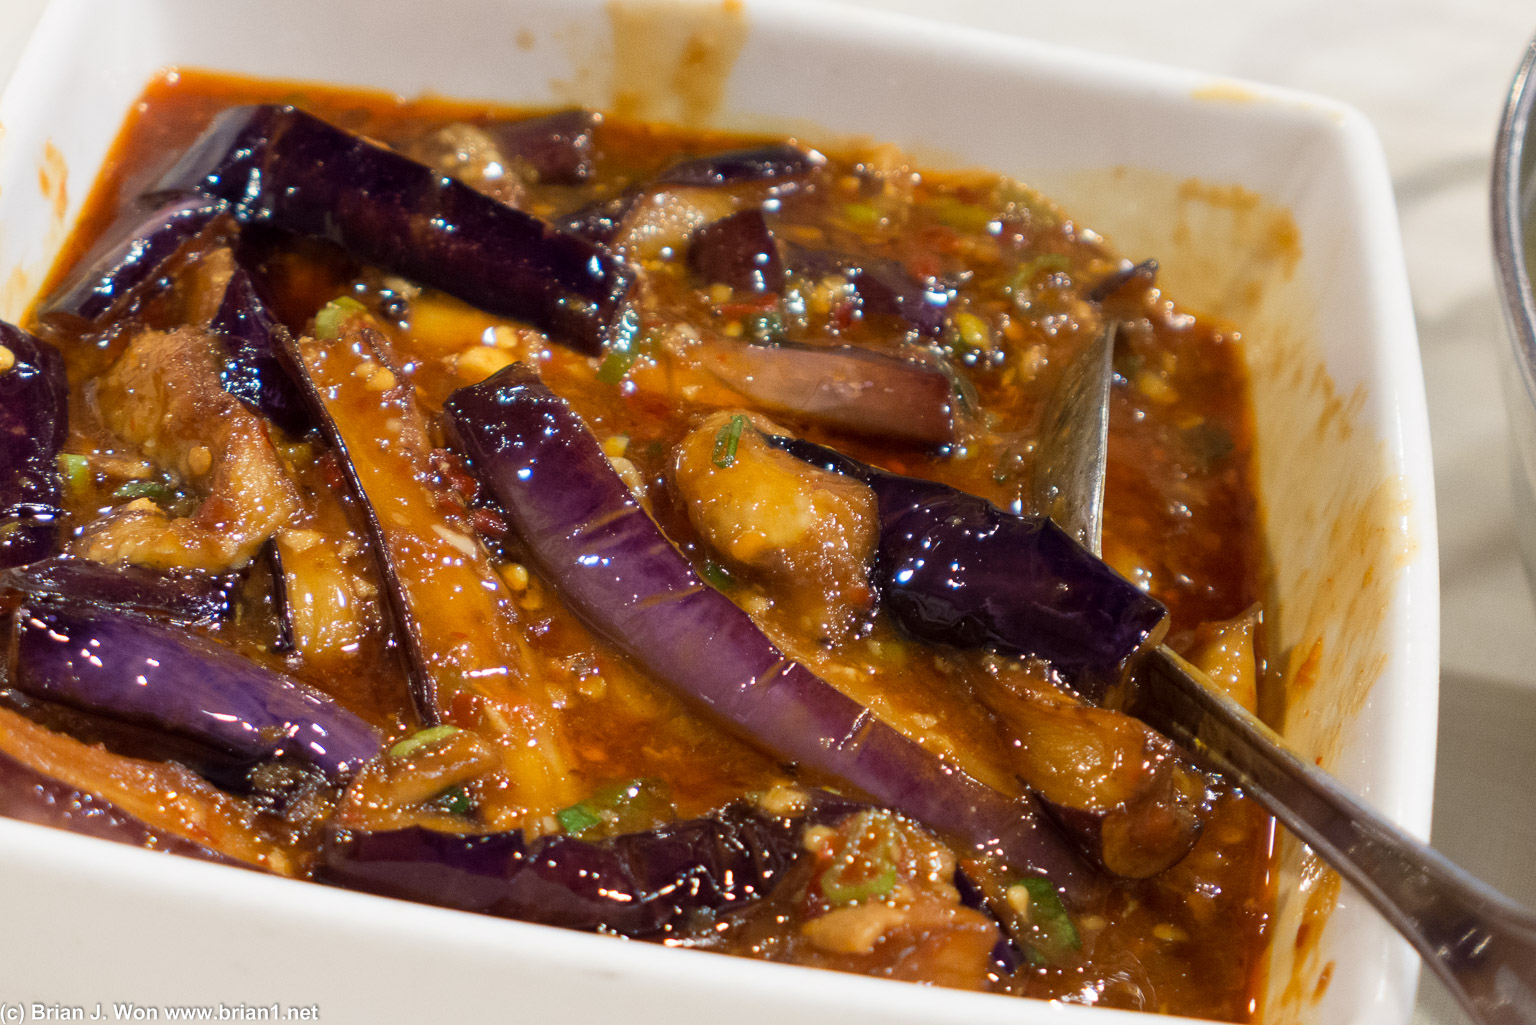 Eggplant was good but a little bland compared to the rest.